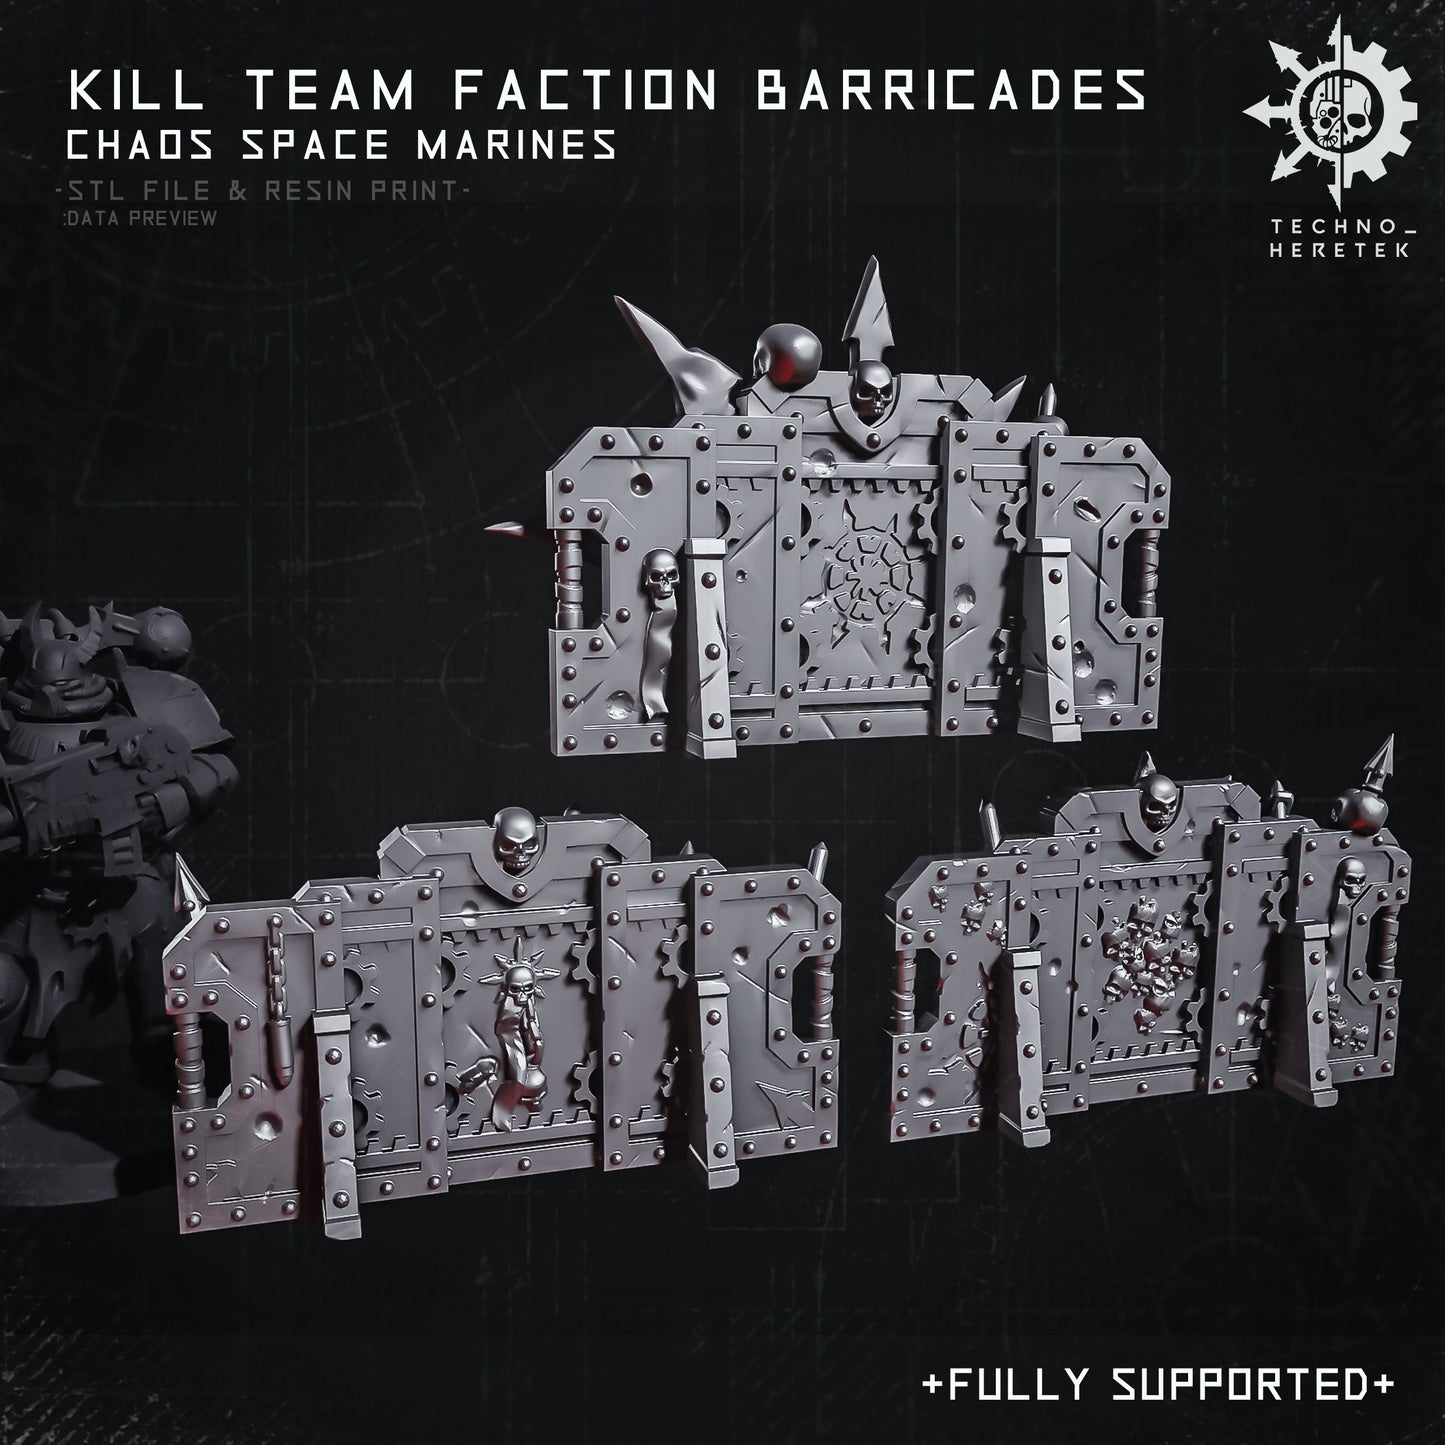 Chaos Space Marines Faction Barricades for Kill Team - STL File Pack